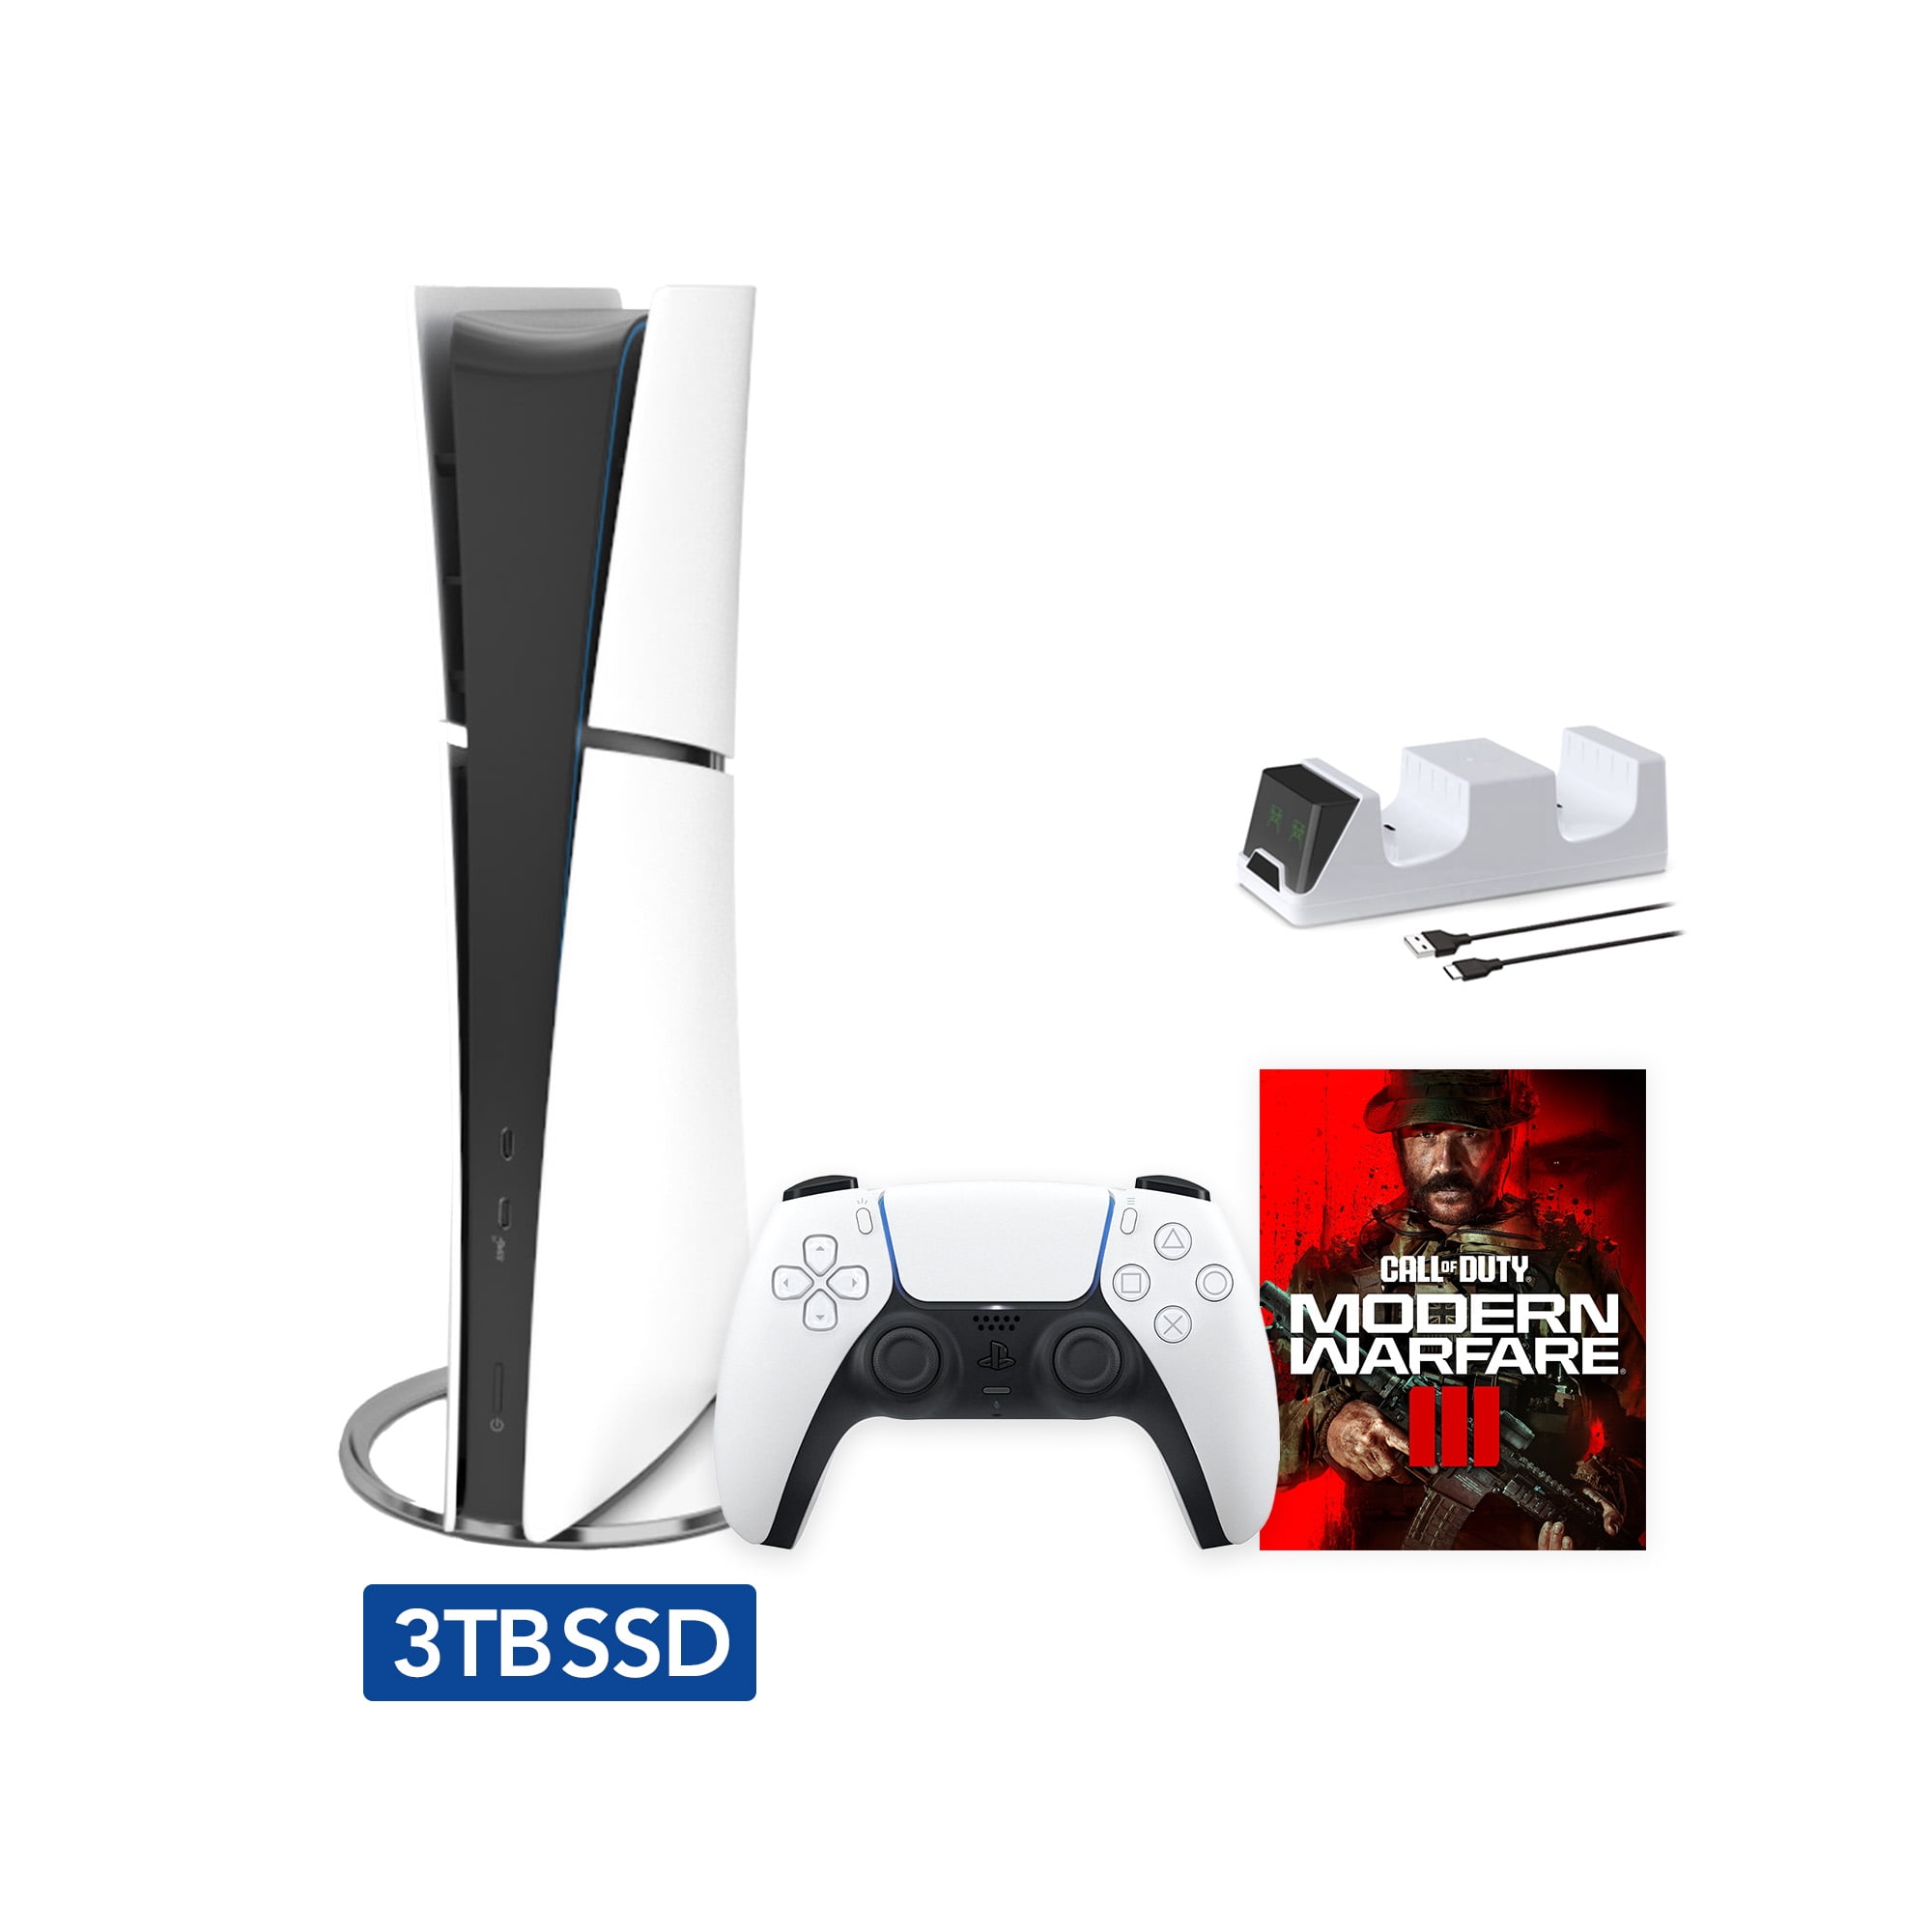 2023 New PlayStation 5 Slim Upgraded 3TB Digital Edition Spider-Man 2  Bundle and Mytrix Controller Charger - White, Slim PS5 3TB PCIe SSD Gaming  